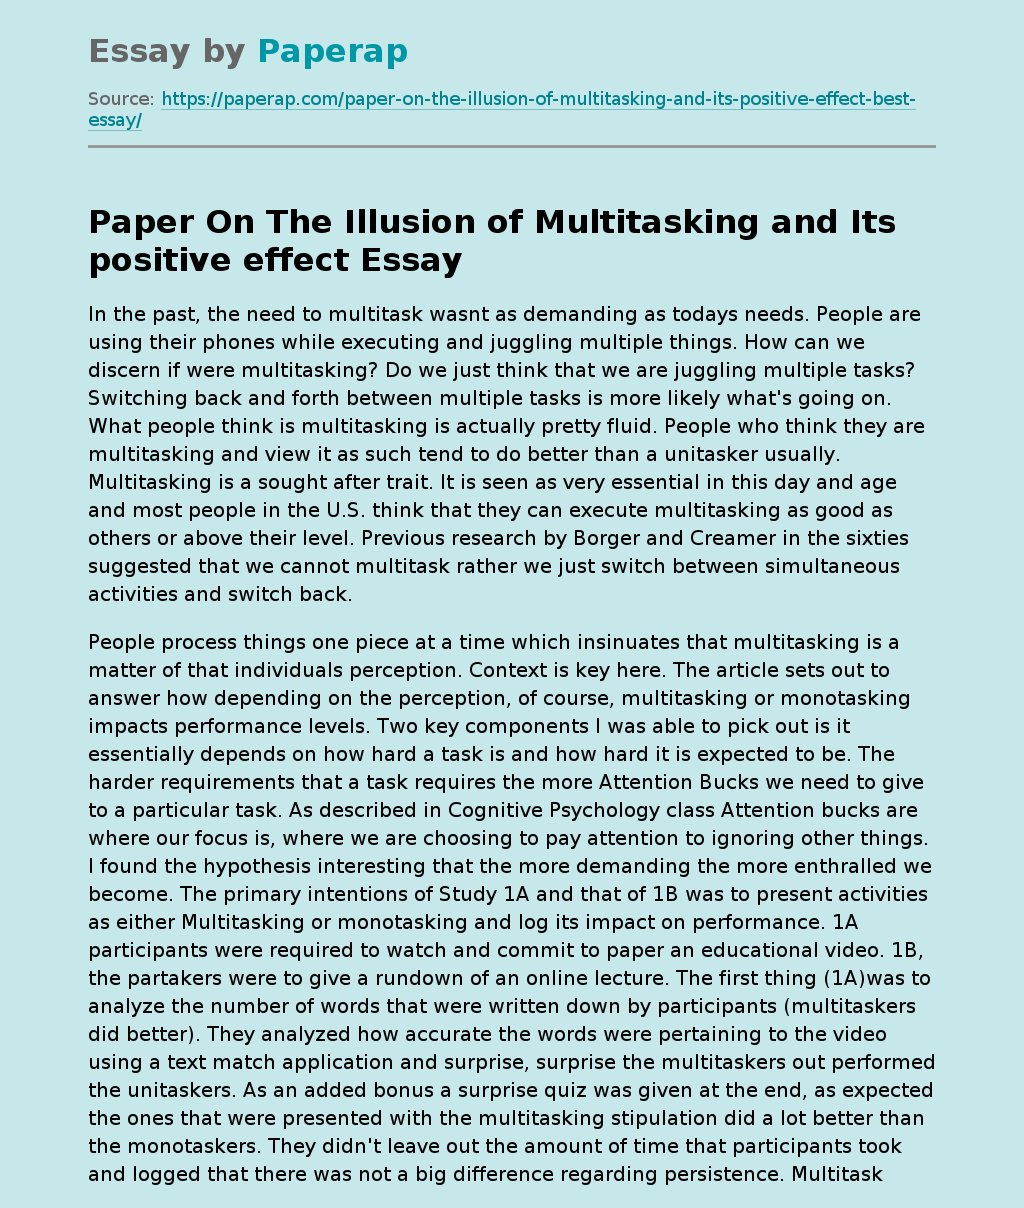 Paper On The Illusion of Multitasking and Its positive effect